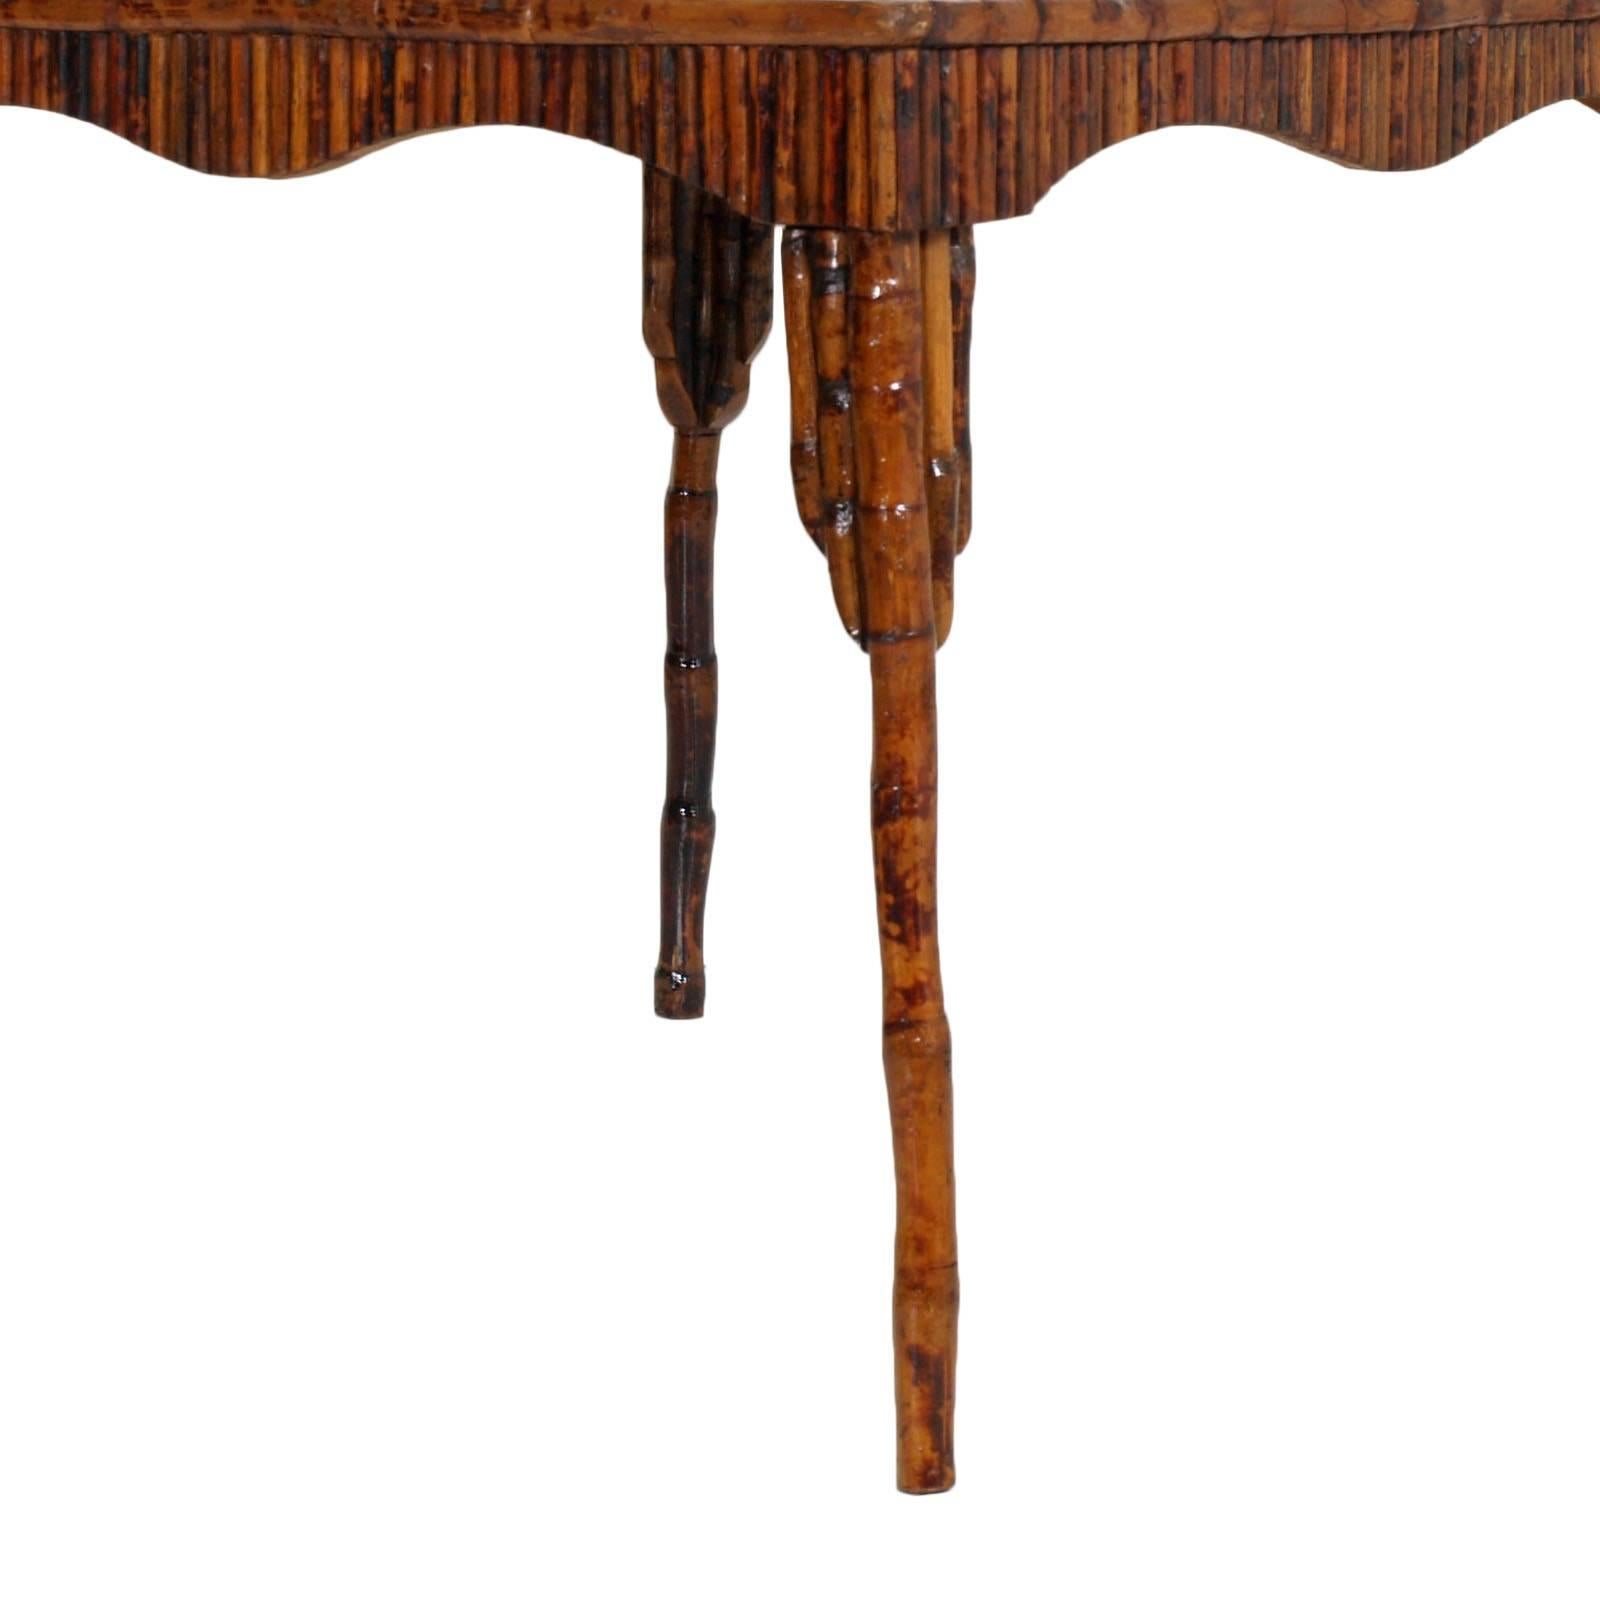 Lacquered Precious Art Deco Chinoiserie Table from the 1920s, in beech wood hand-carved  For Sale